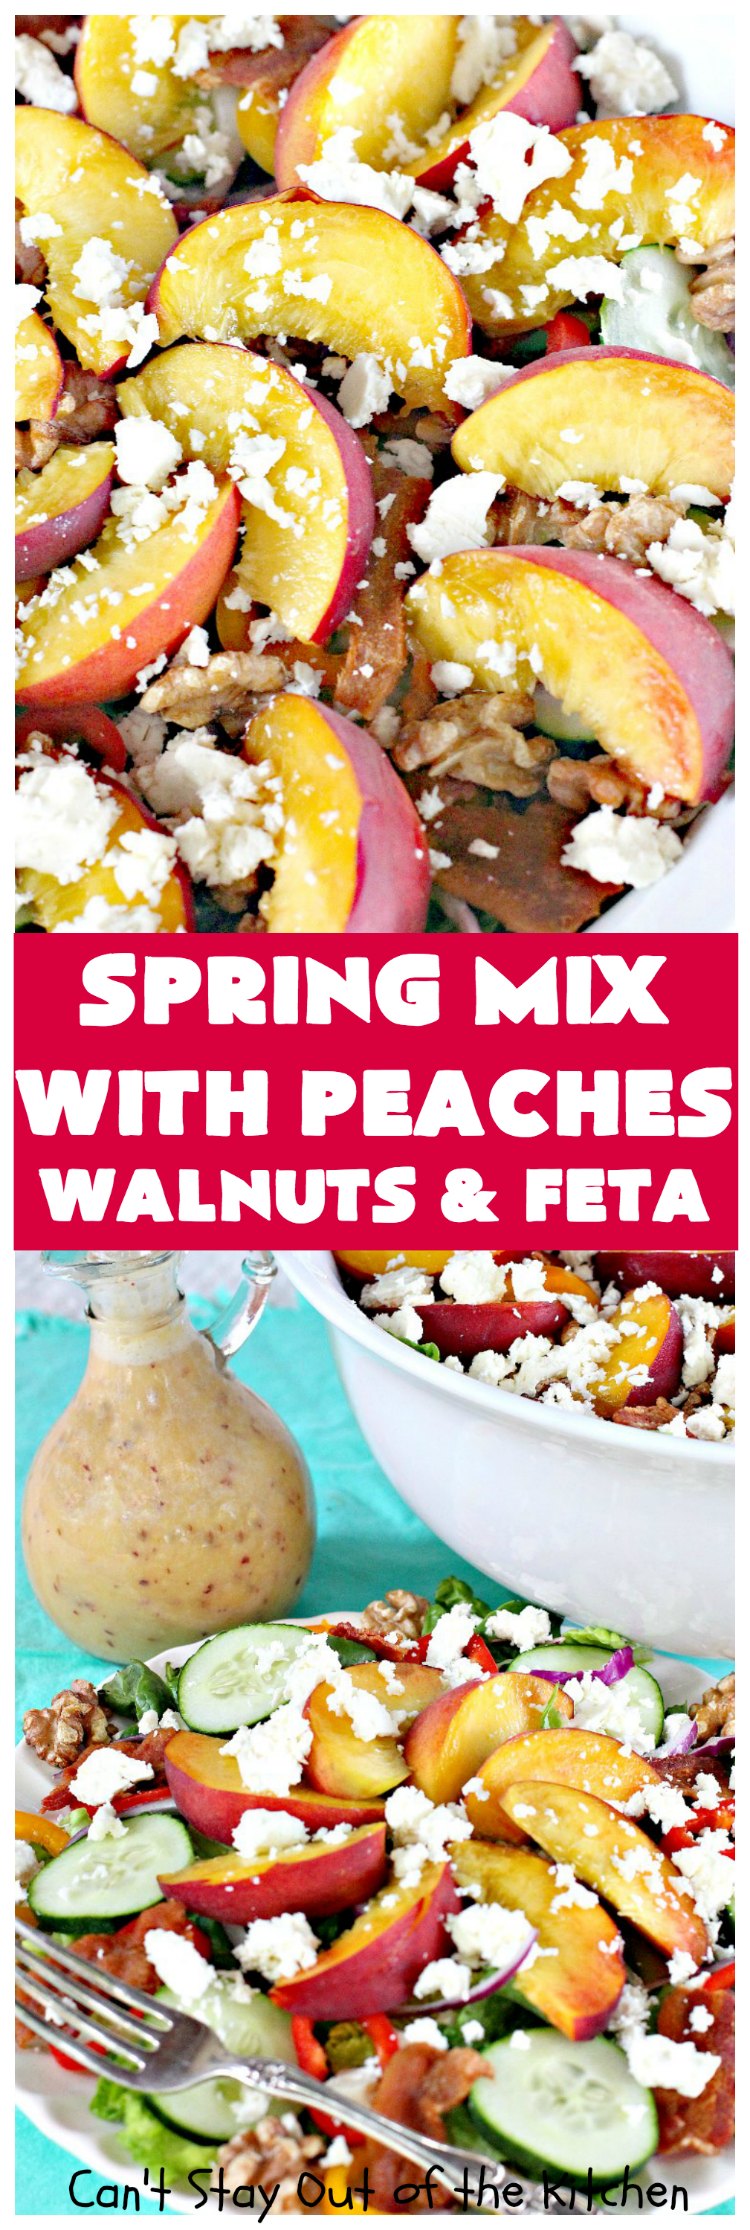 Spring Mix with Peaches, Walnuts and Feta | Can't Stay Out of the Kitchen